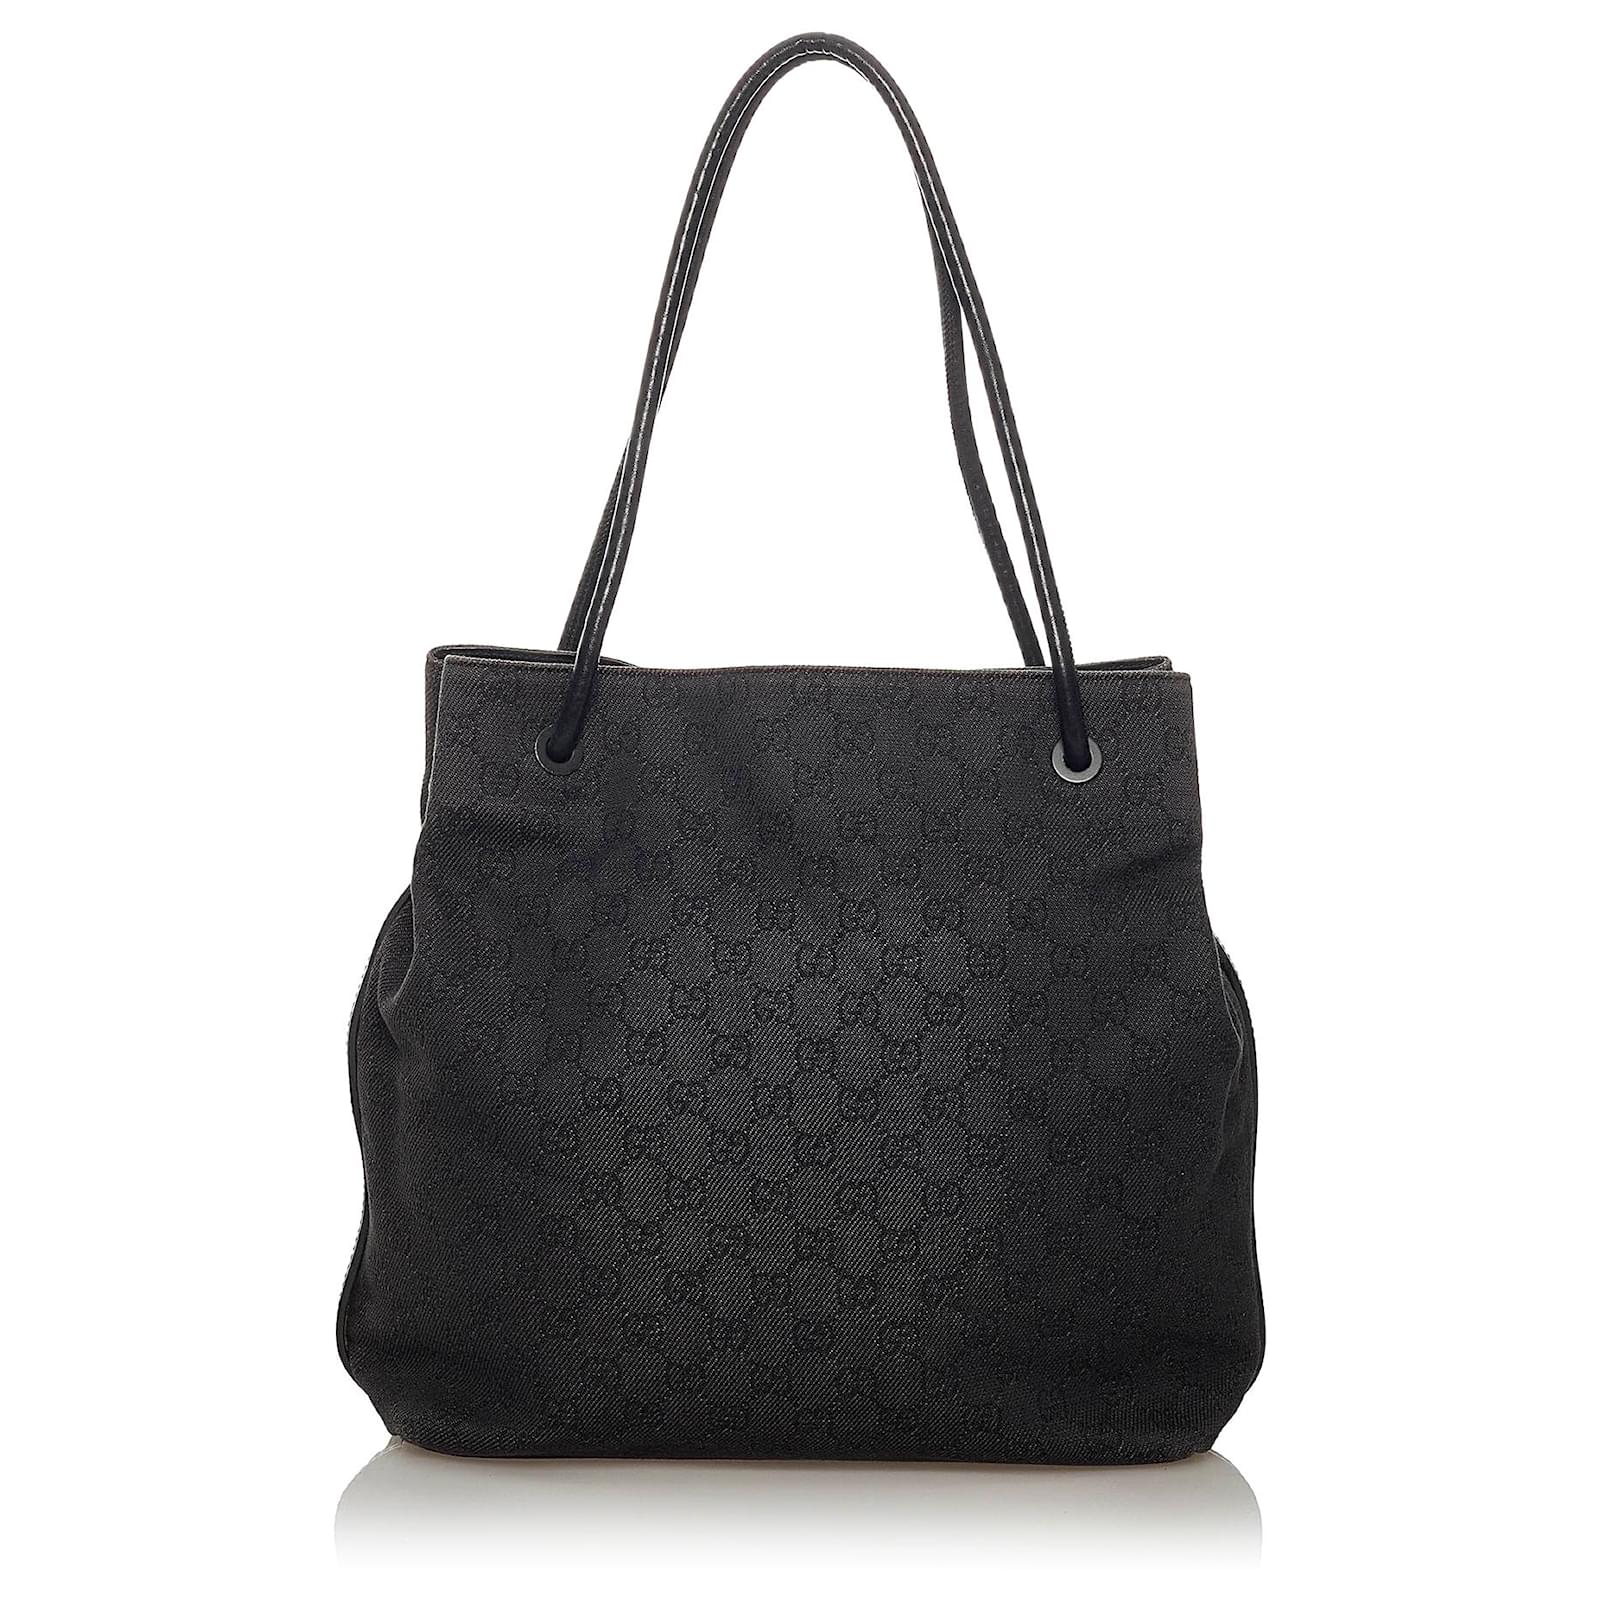 Gucci Black GG Canvas Gifford Tote Bag Leather Cloth Pony-style ...